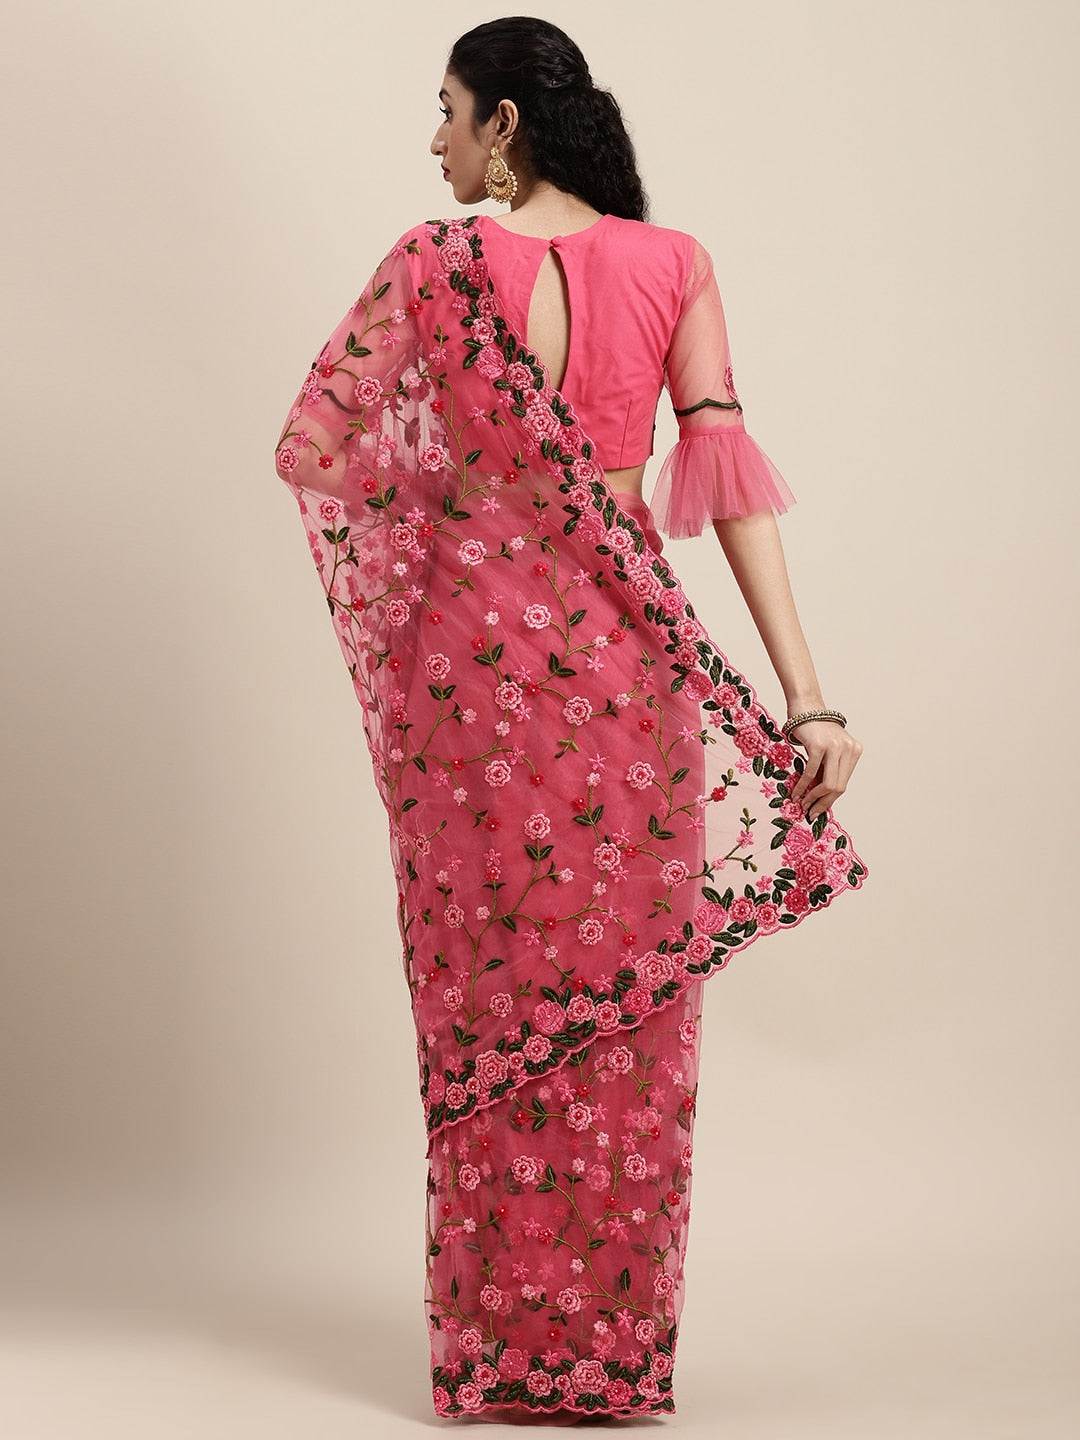 Net Embroidery Pink Saree